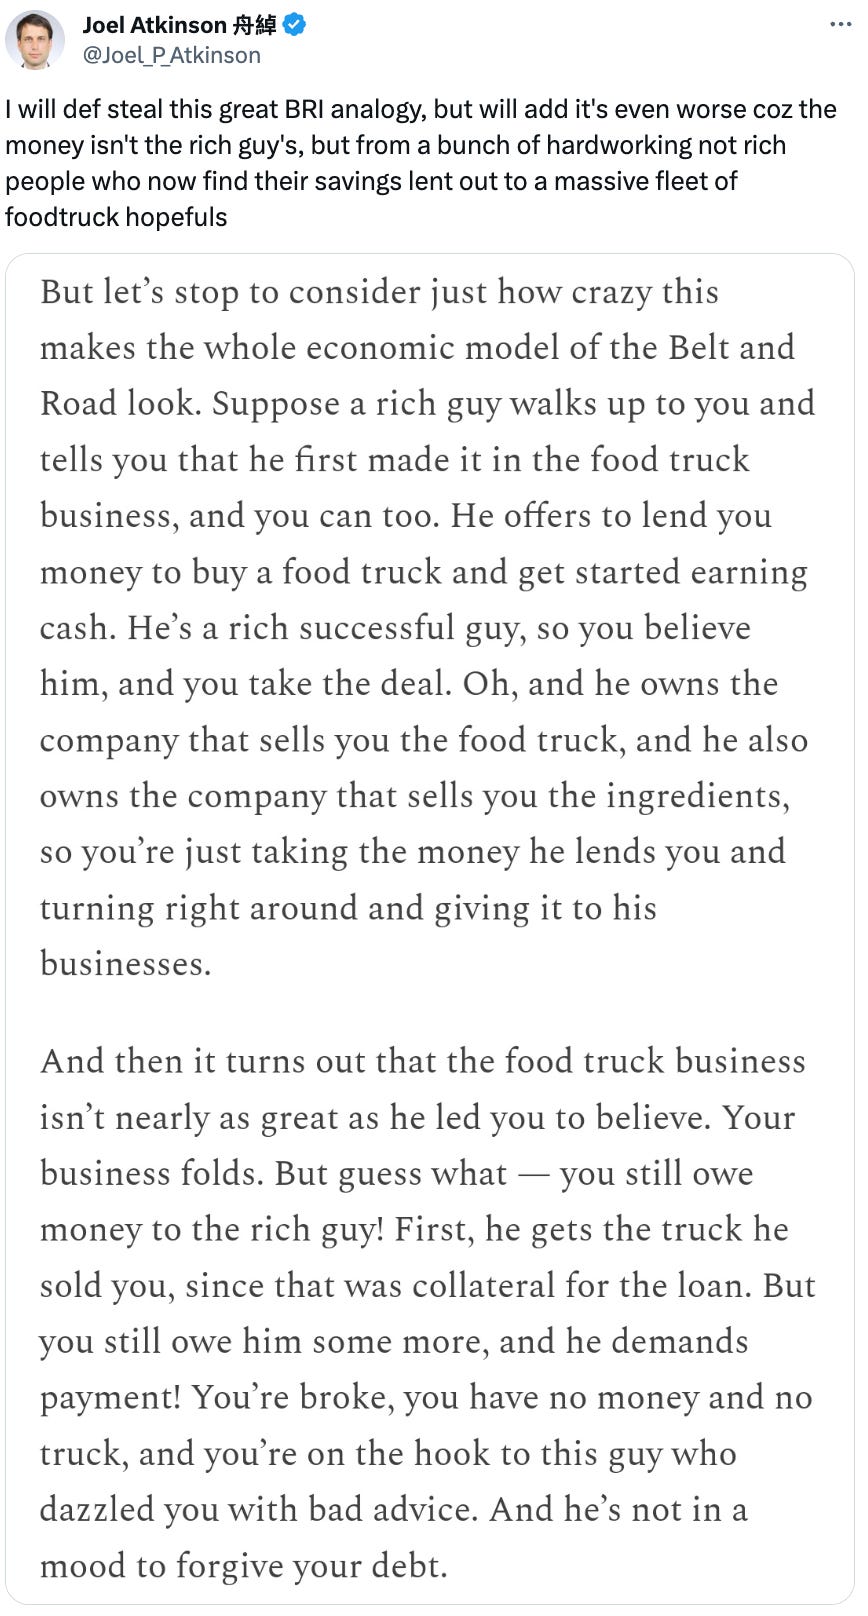  See new posts Conversation Joel Atkinson 舟綽 @Joel_P_Atkinson I will def steal this great BRI analogy, but will add it's even worse coz the money isn't the rich guy's, but from a bunch of hardworking not rich people who now find their savings lent out to a massive fleet of foodtruck hopefuls